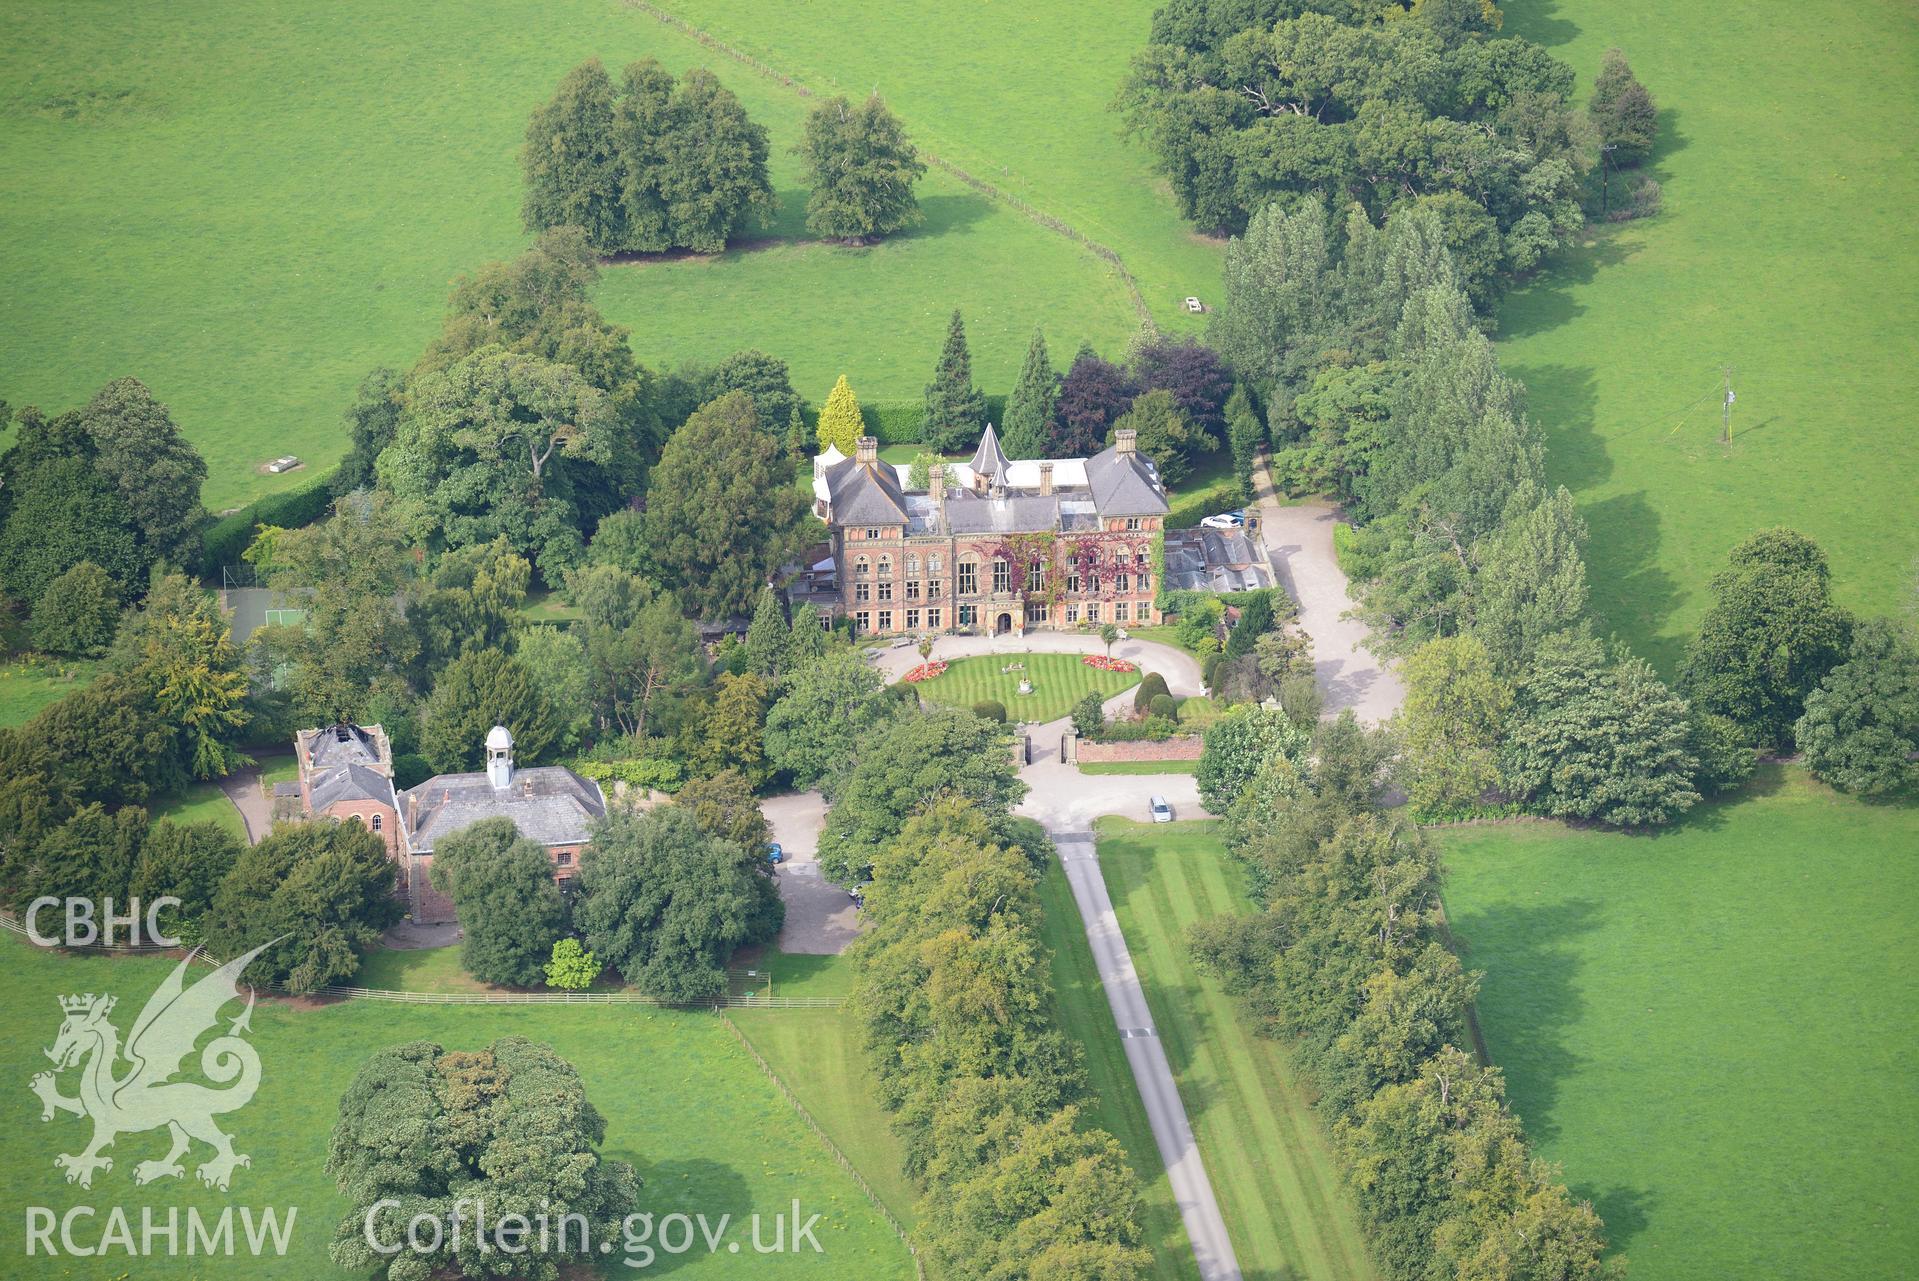 Soughton Hall, Garden, Coach House and Stable Block, Soughton, near Mold. Oblique aerial photograph taken during the Royal Commission's programme of archaeological aerial reconnaissance by Toby Driver on 11th September 2015.